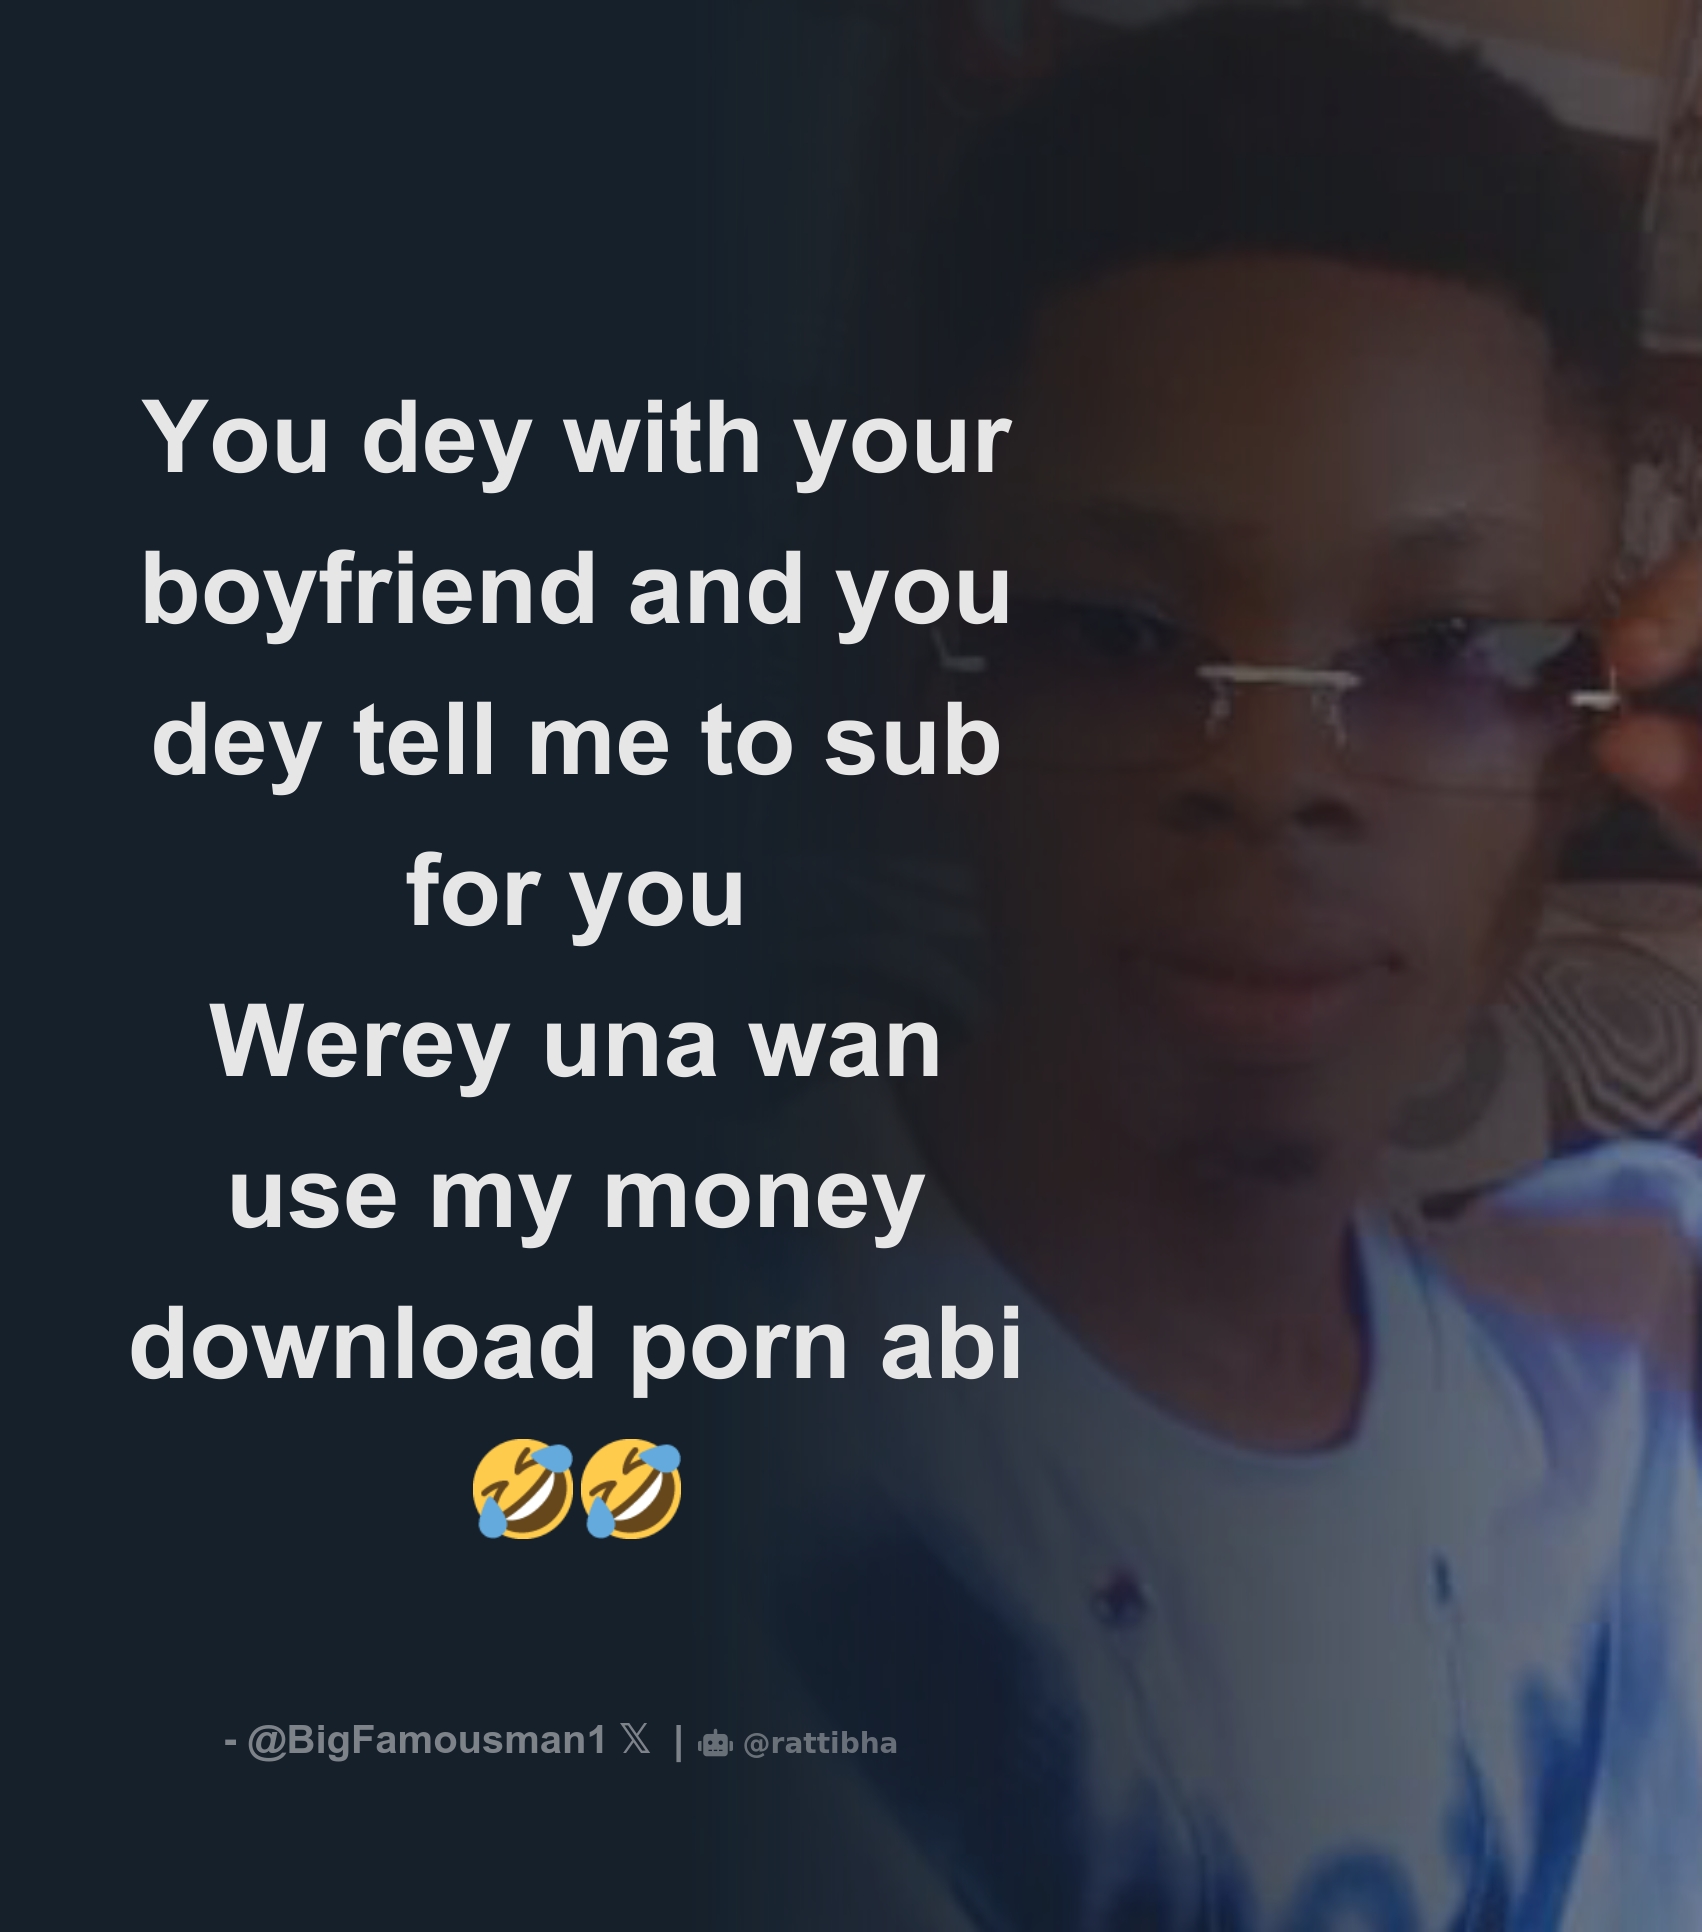 X Bf Download - You dey with your boyfriend and you dey tell me to sub for you Werey una  wan use my money download porn abi ðŸ¤£ðŸ¤£ - Thread from Big Famous  @BigFamousman1 - Rattibha